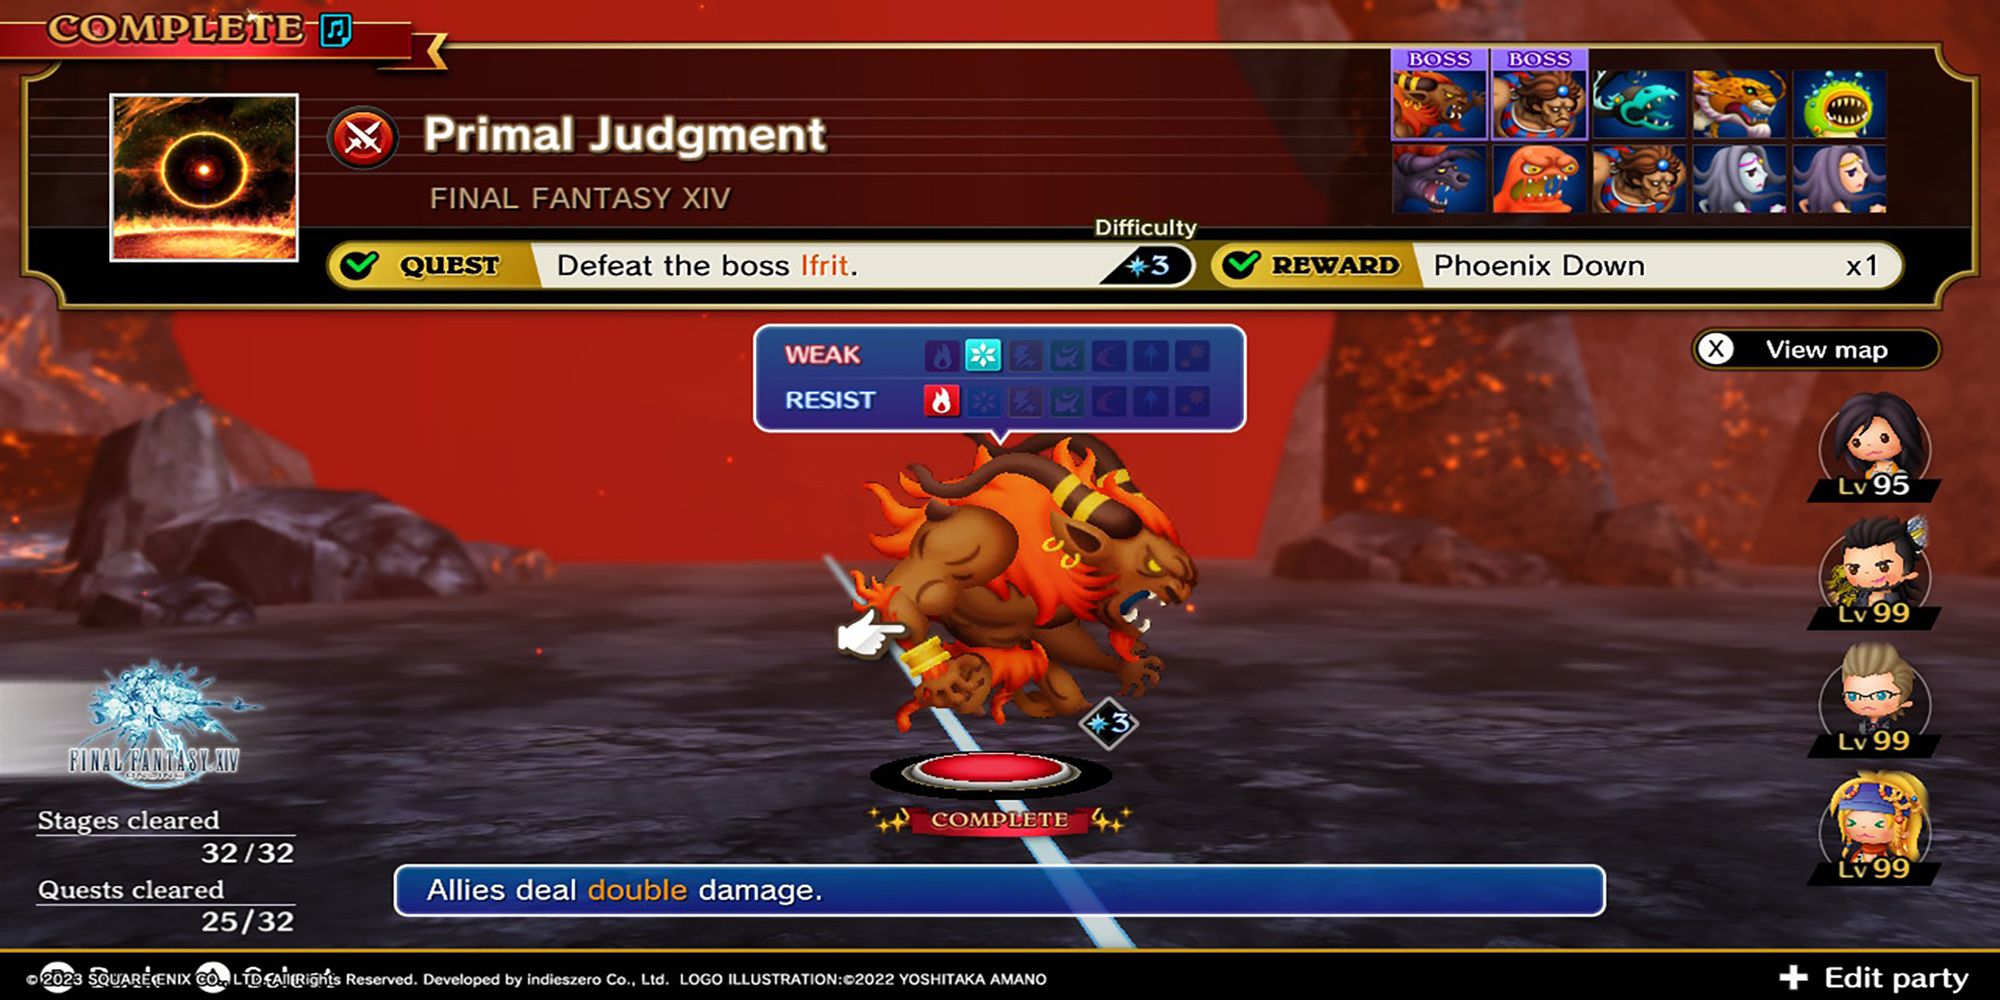 Ifrit stares down the player in a firey landscape on FF14's Primal Judgment Series Quest page in Theatrhythm: Final Bar Line.